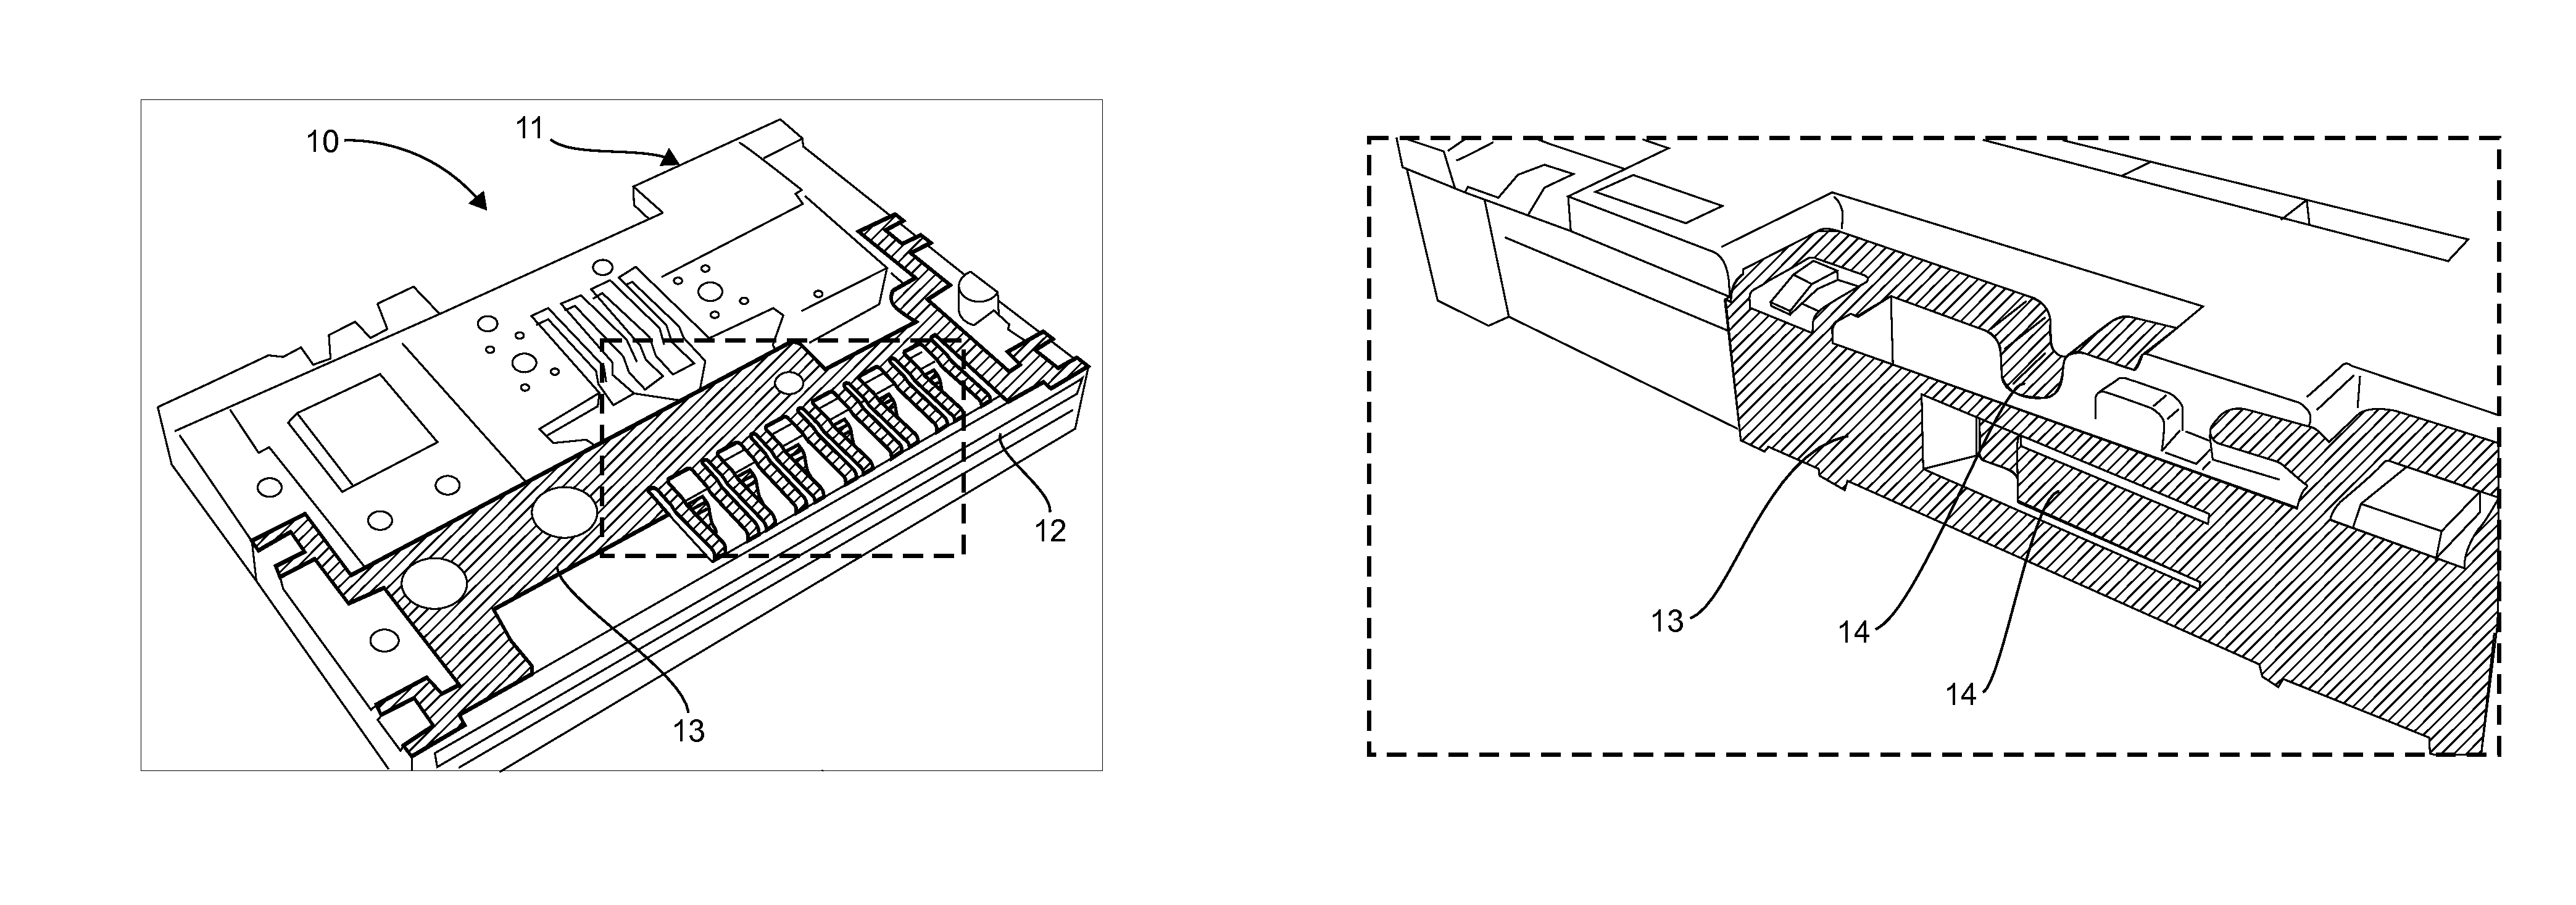 Memory card connector having several conductive plastic parts with different values of resistance for discharging static electricity